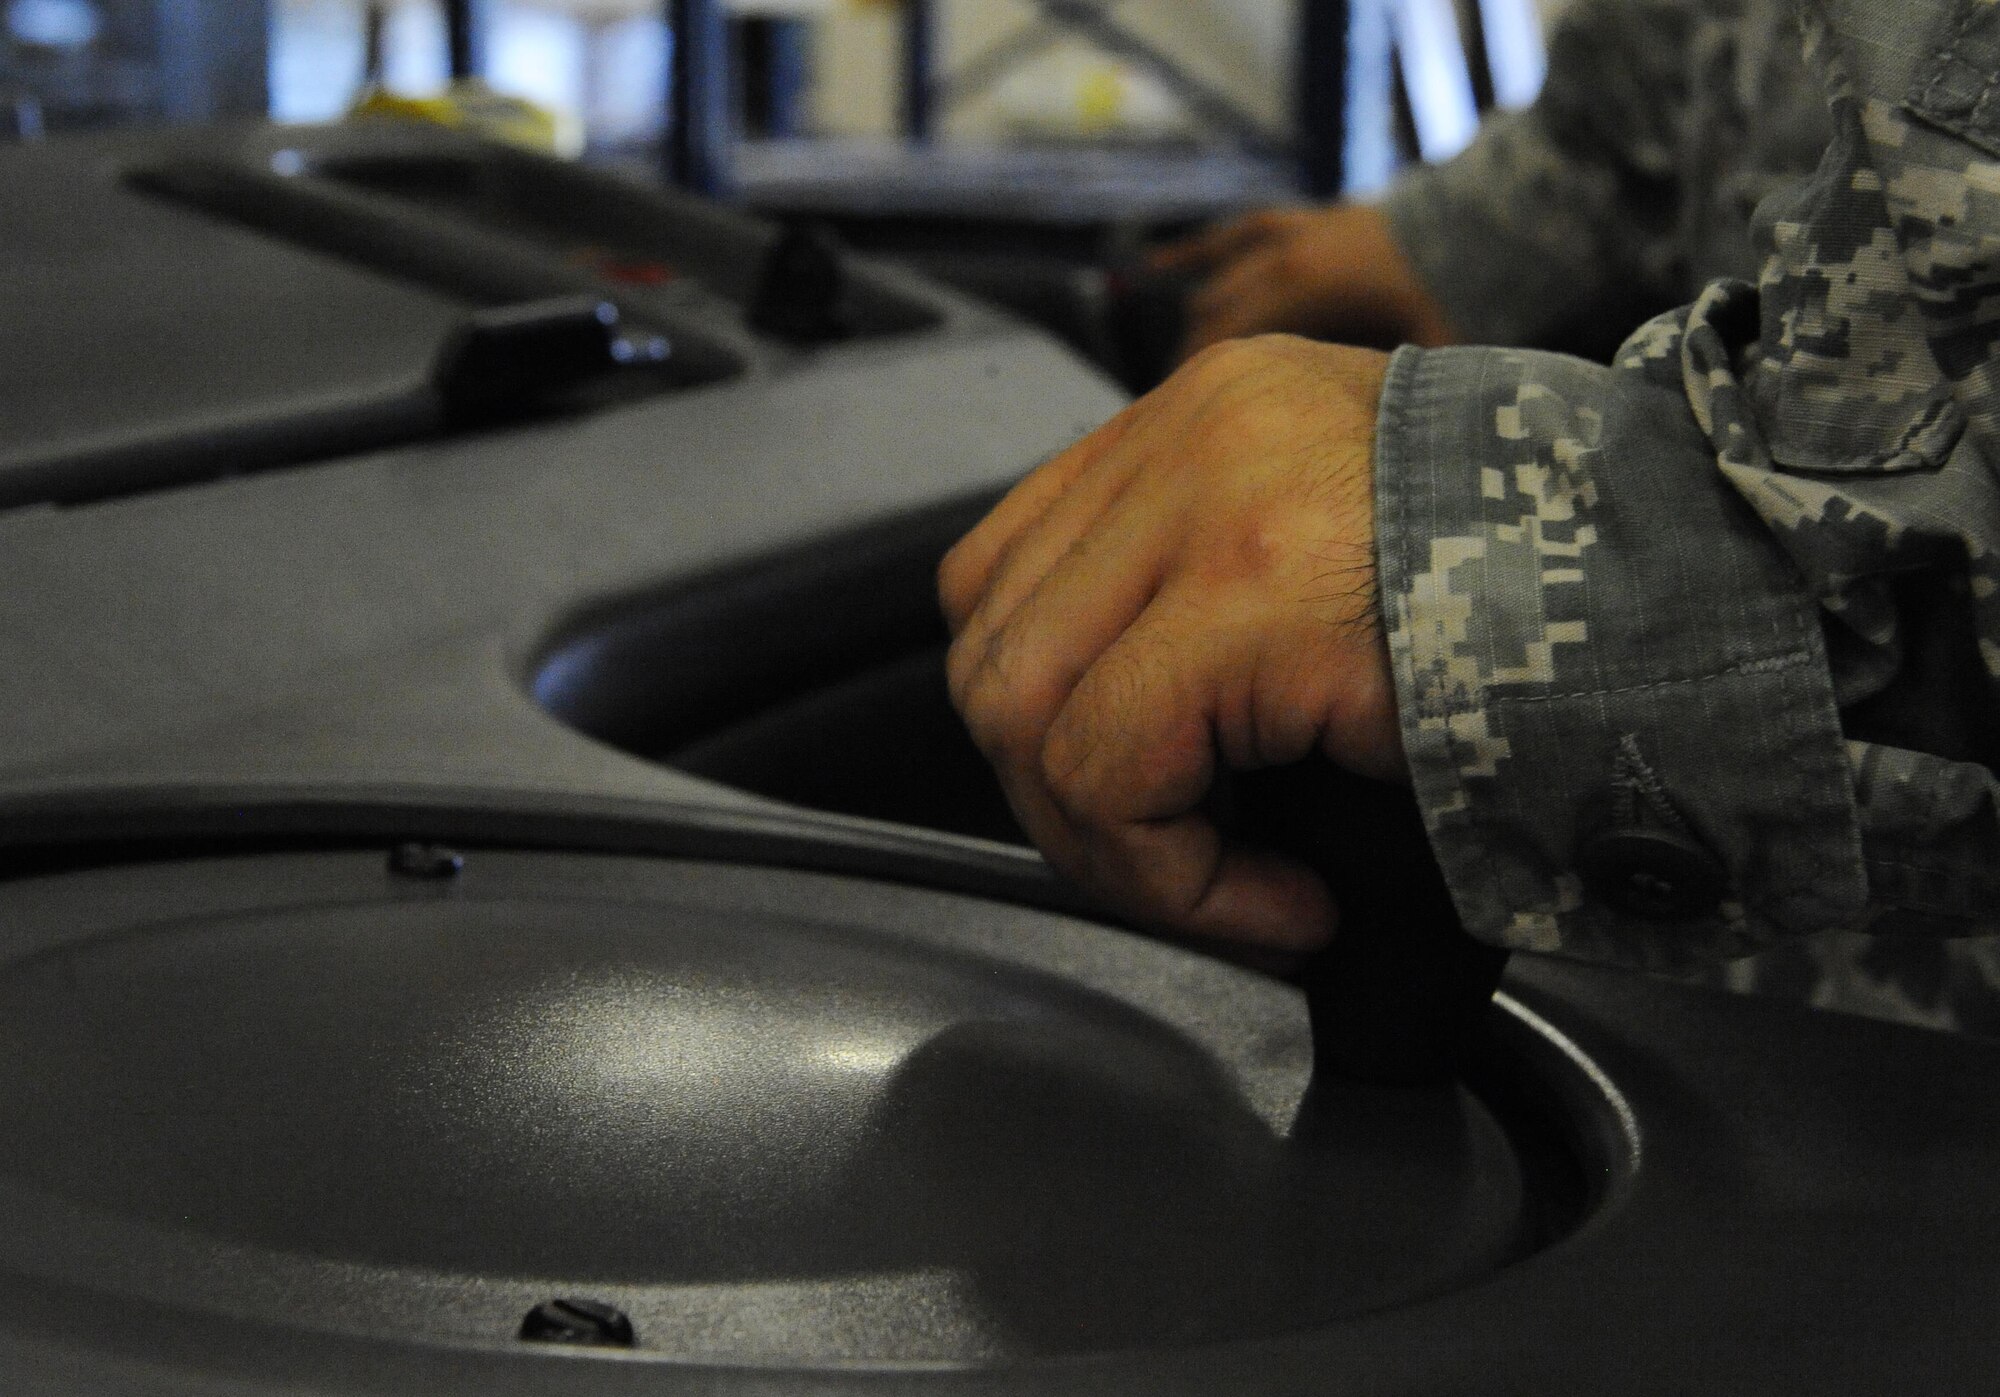 Senior Airman Matthew Stilwell, 1st Special Operations Logistics Readiness Squadron materiel management flight service center journeyman, operates heavy machinery at Hurlburt Field, Fla., June 29, 2015. The materiel management flight stocks, stores, issues and receives 27,400 line items of supplies and equipment for Hurlburt Field. (U.S. Air Force photo/Airman 1st Class Andrea Posey)